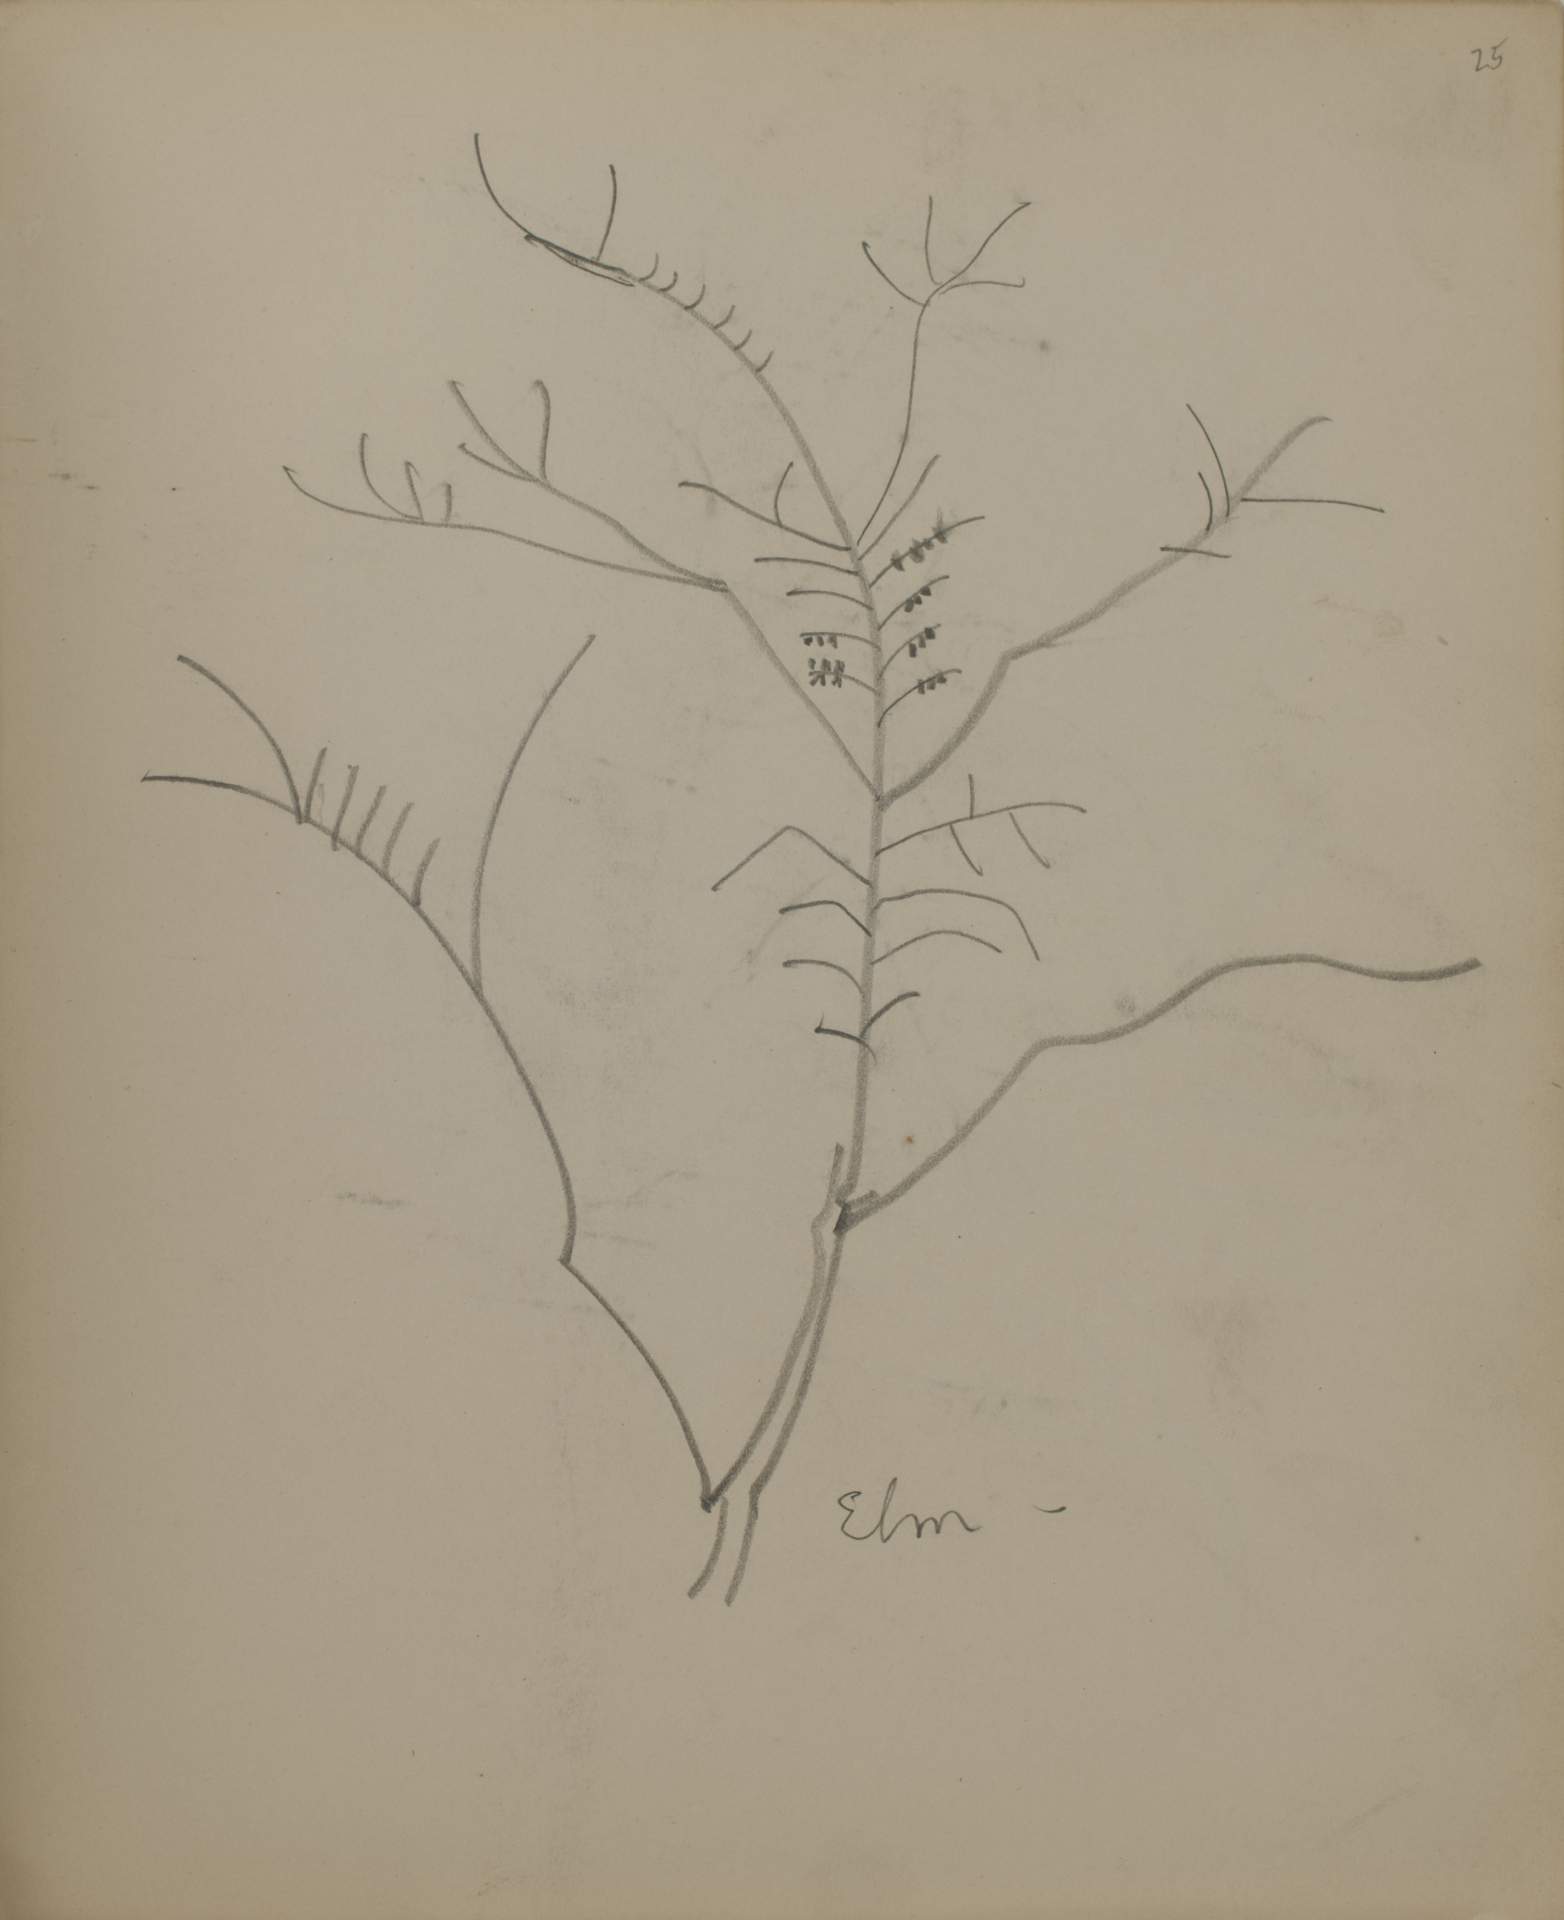 Untitled (sketch of an elm tree)